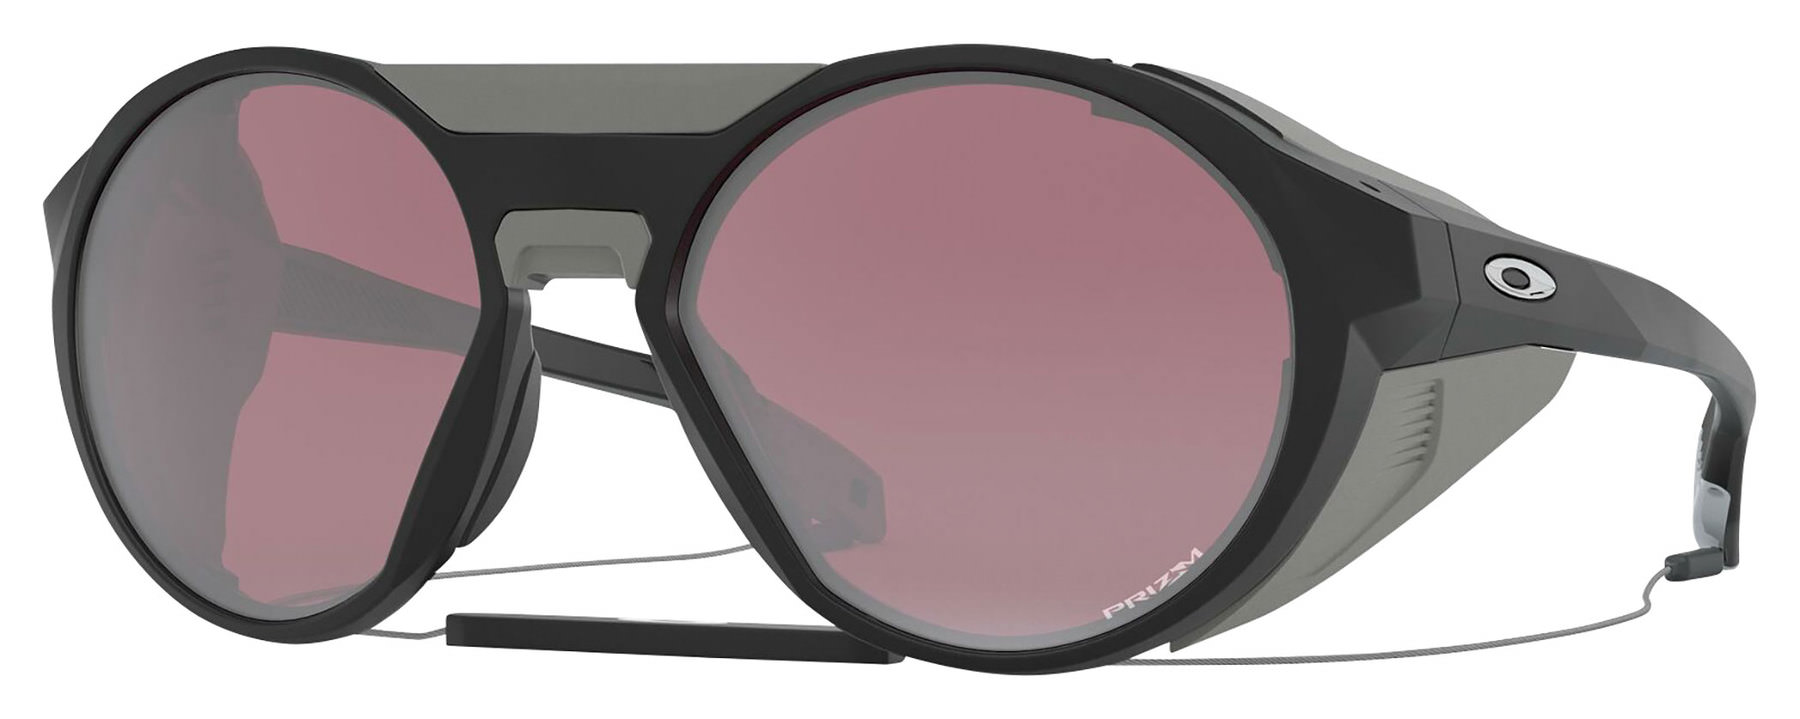 oakley mountaineering goggles